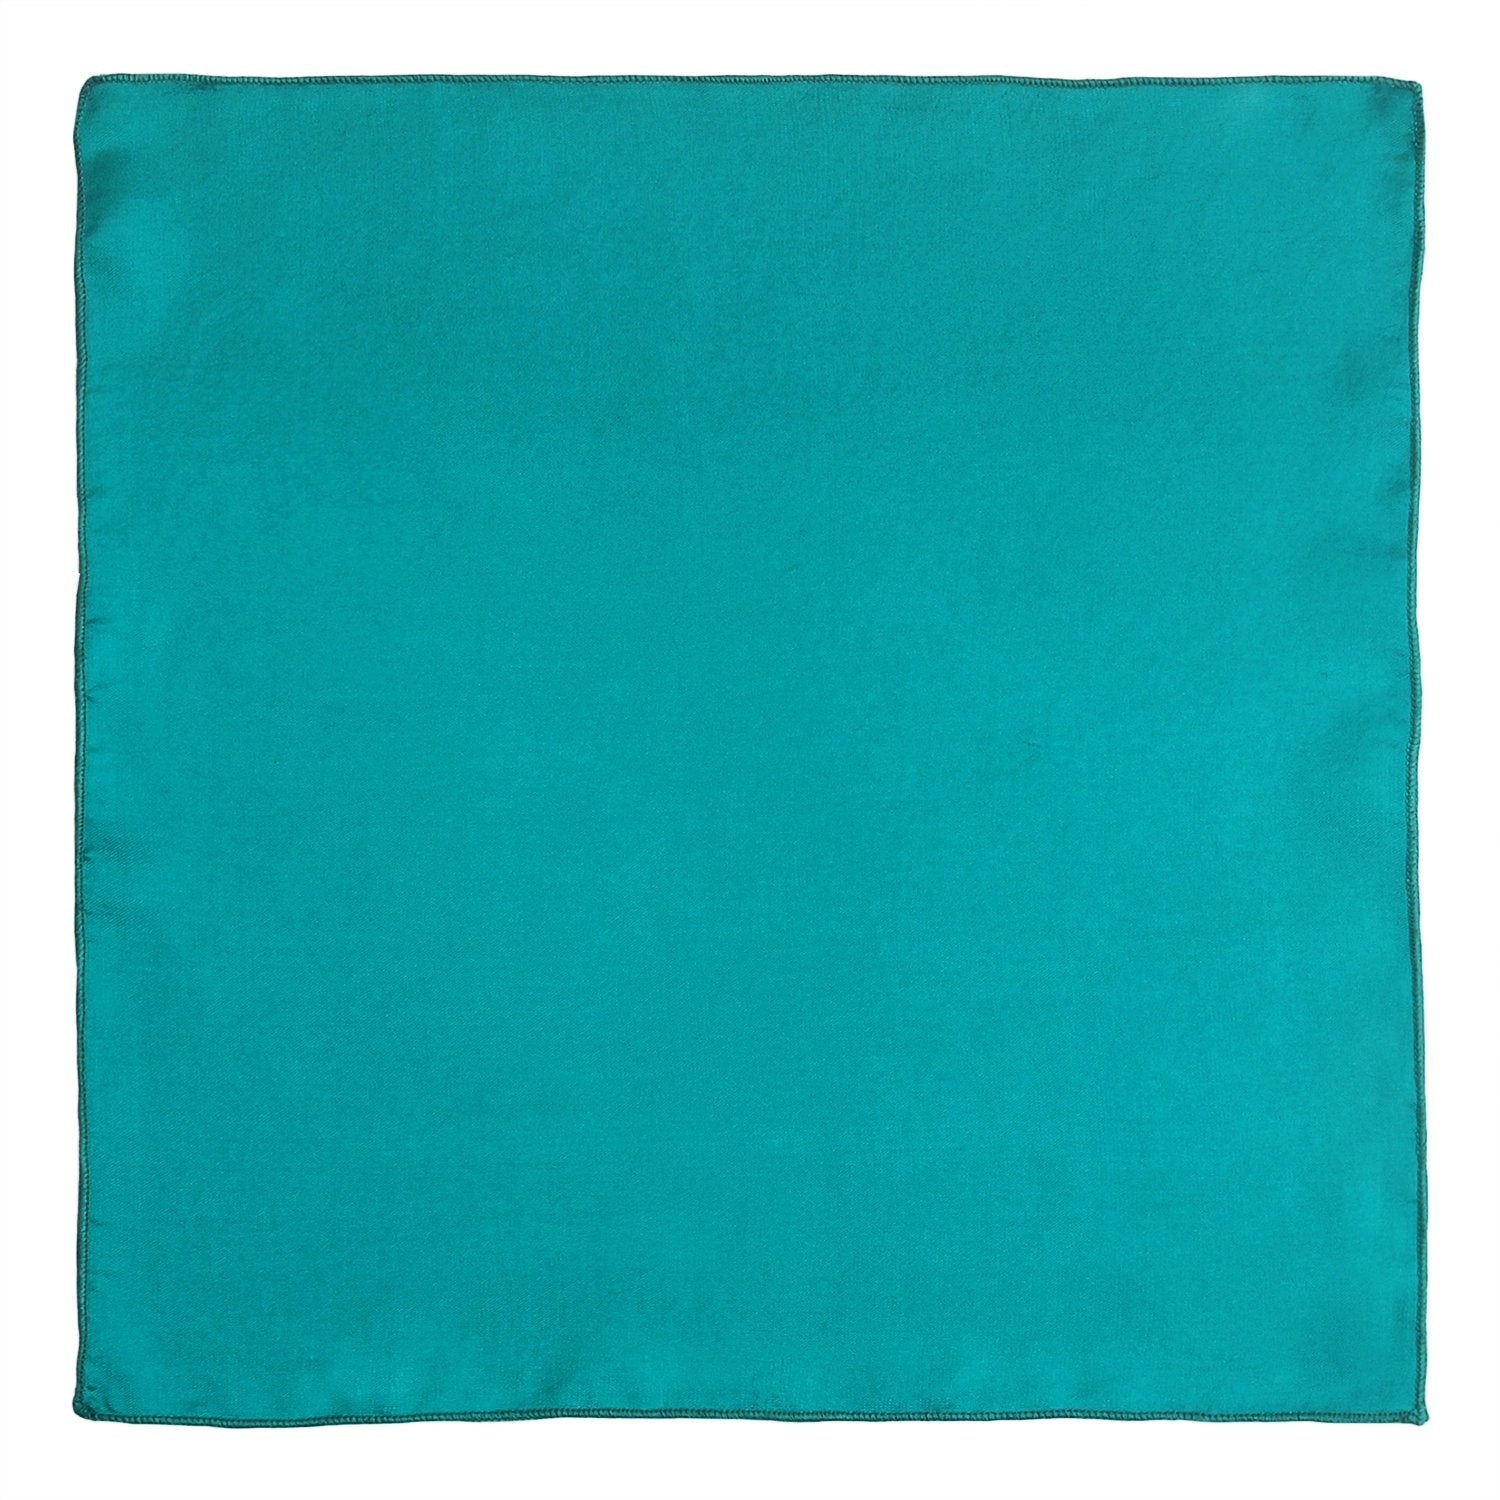 Chokore Enamel Blue Pure Silk Pocket Square, from the Solids Line